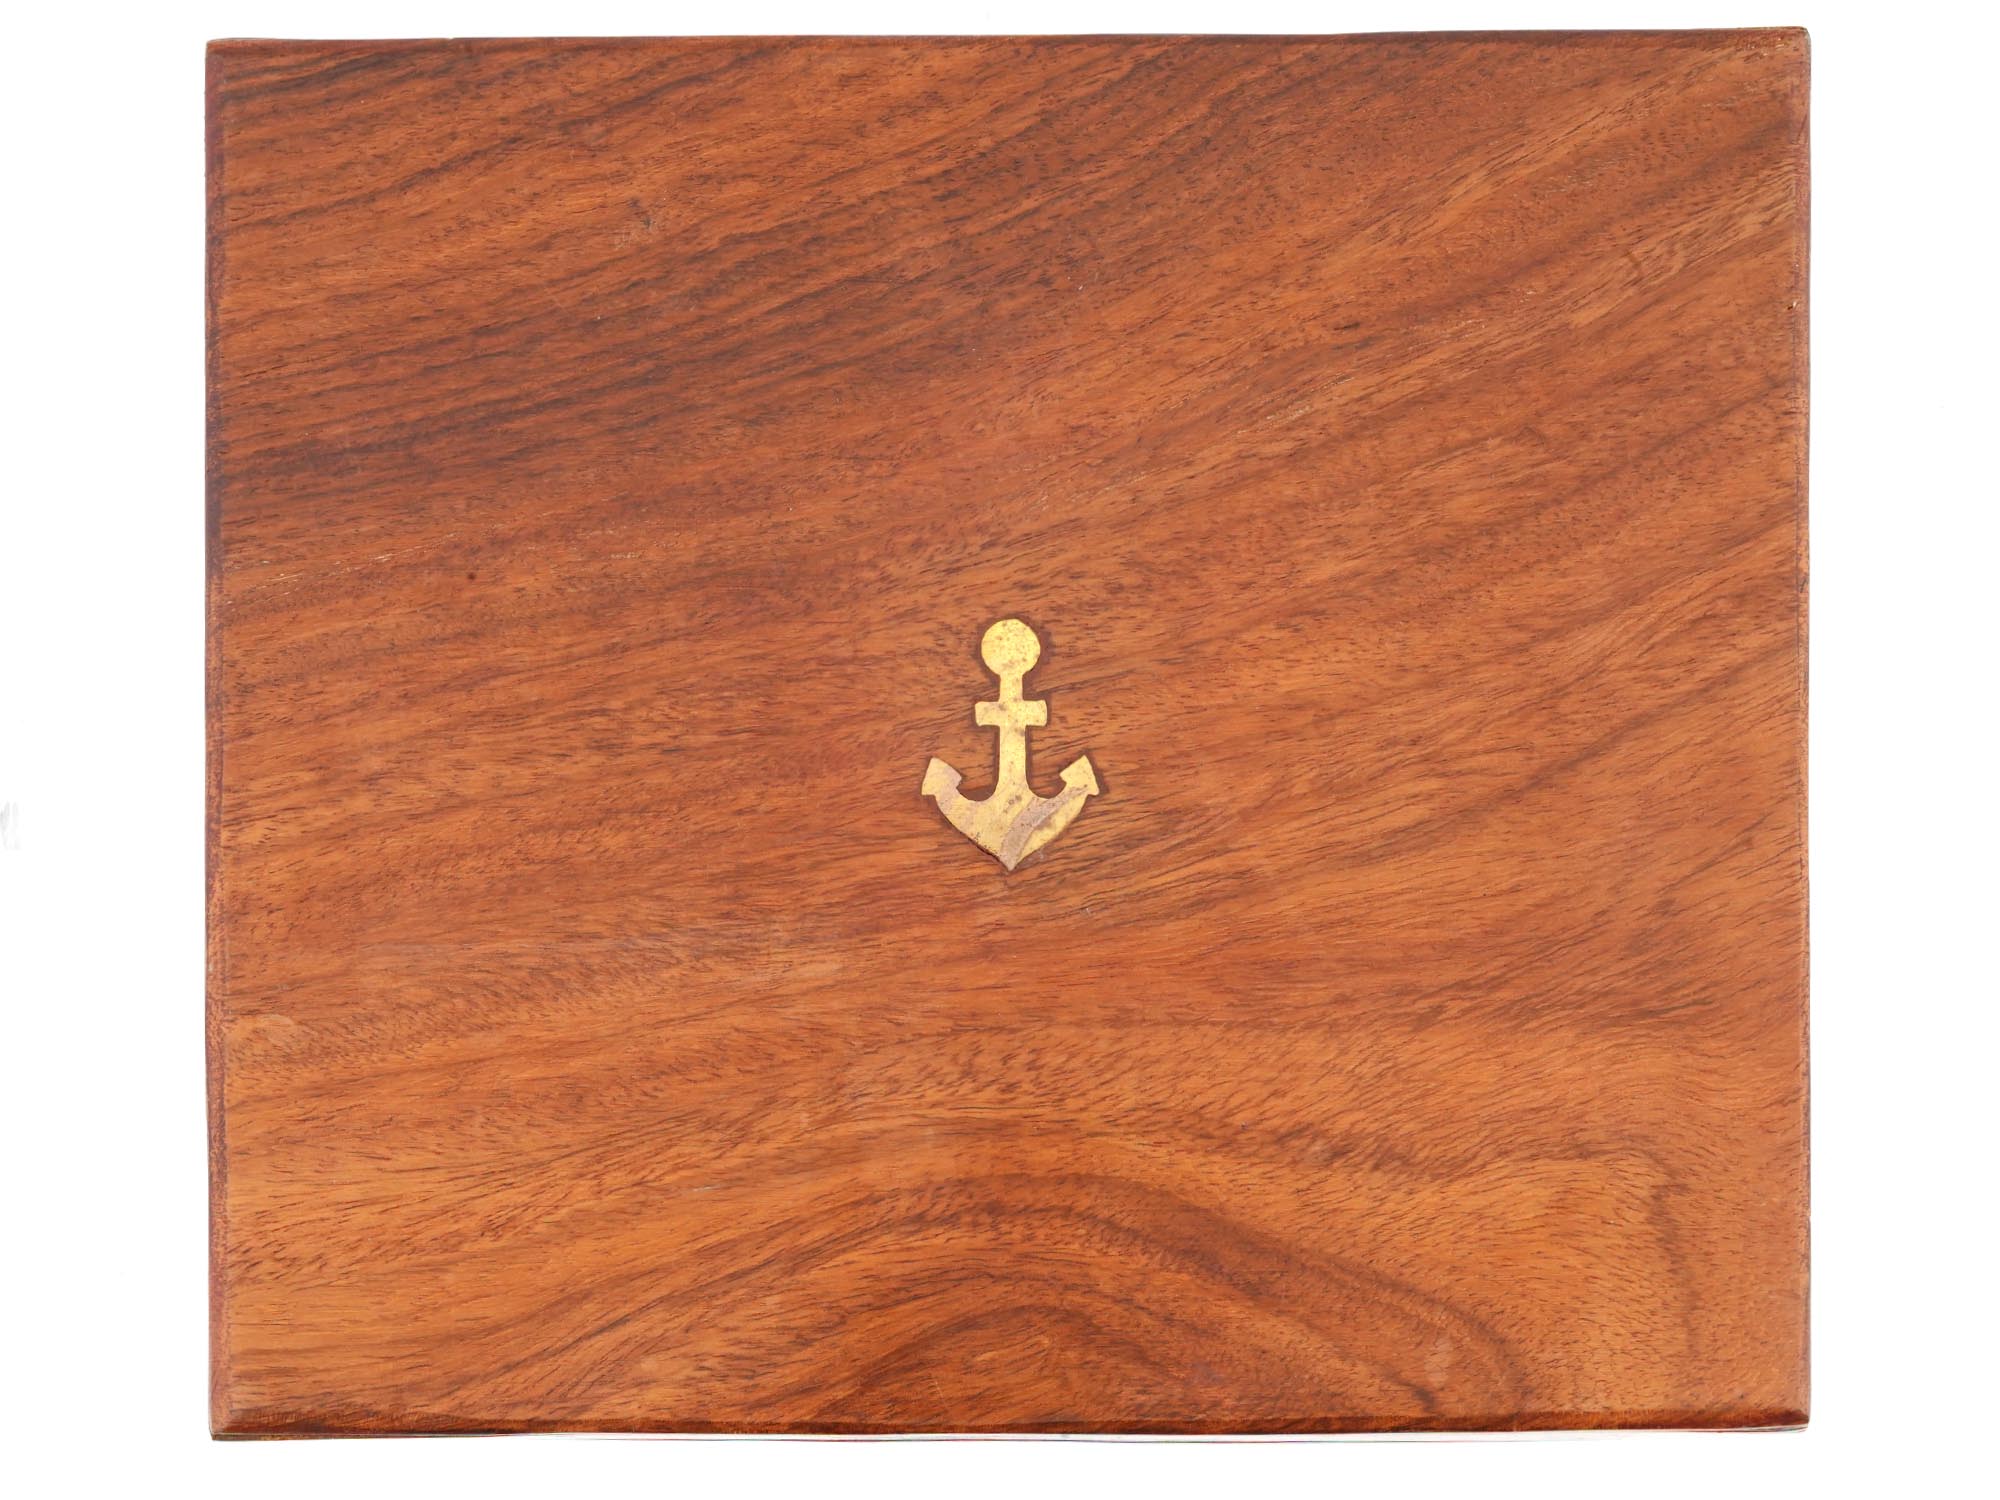 MARINE WOODEN CIGAR BOX WITH ANCHOR DESIGN ON LID PIC-4